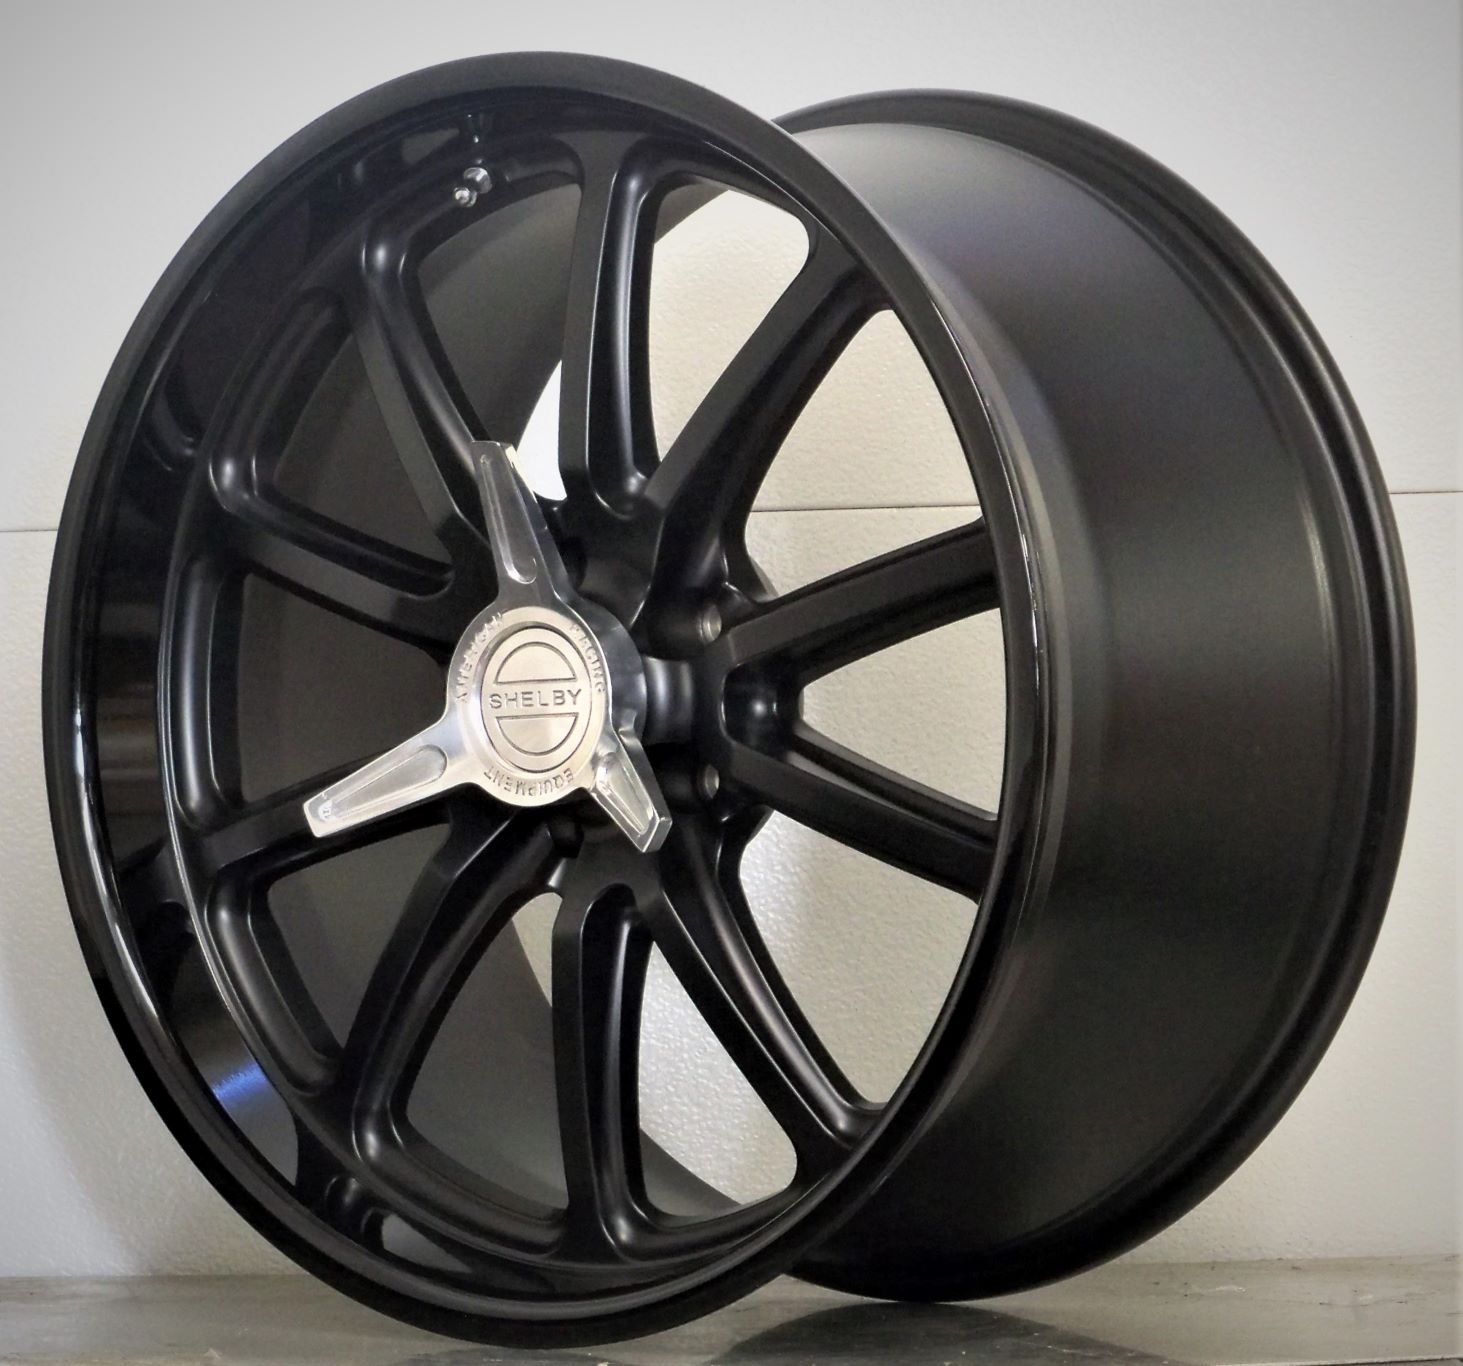 U123SPOL US Mags all over black with polished Shelby spinners